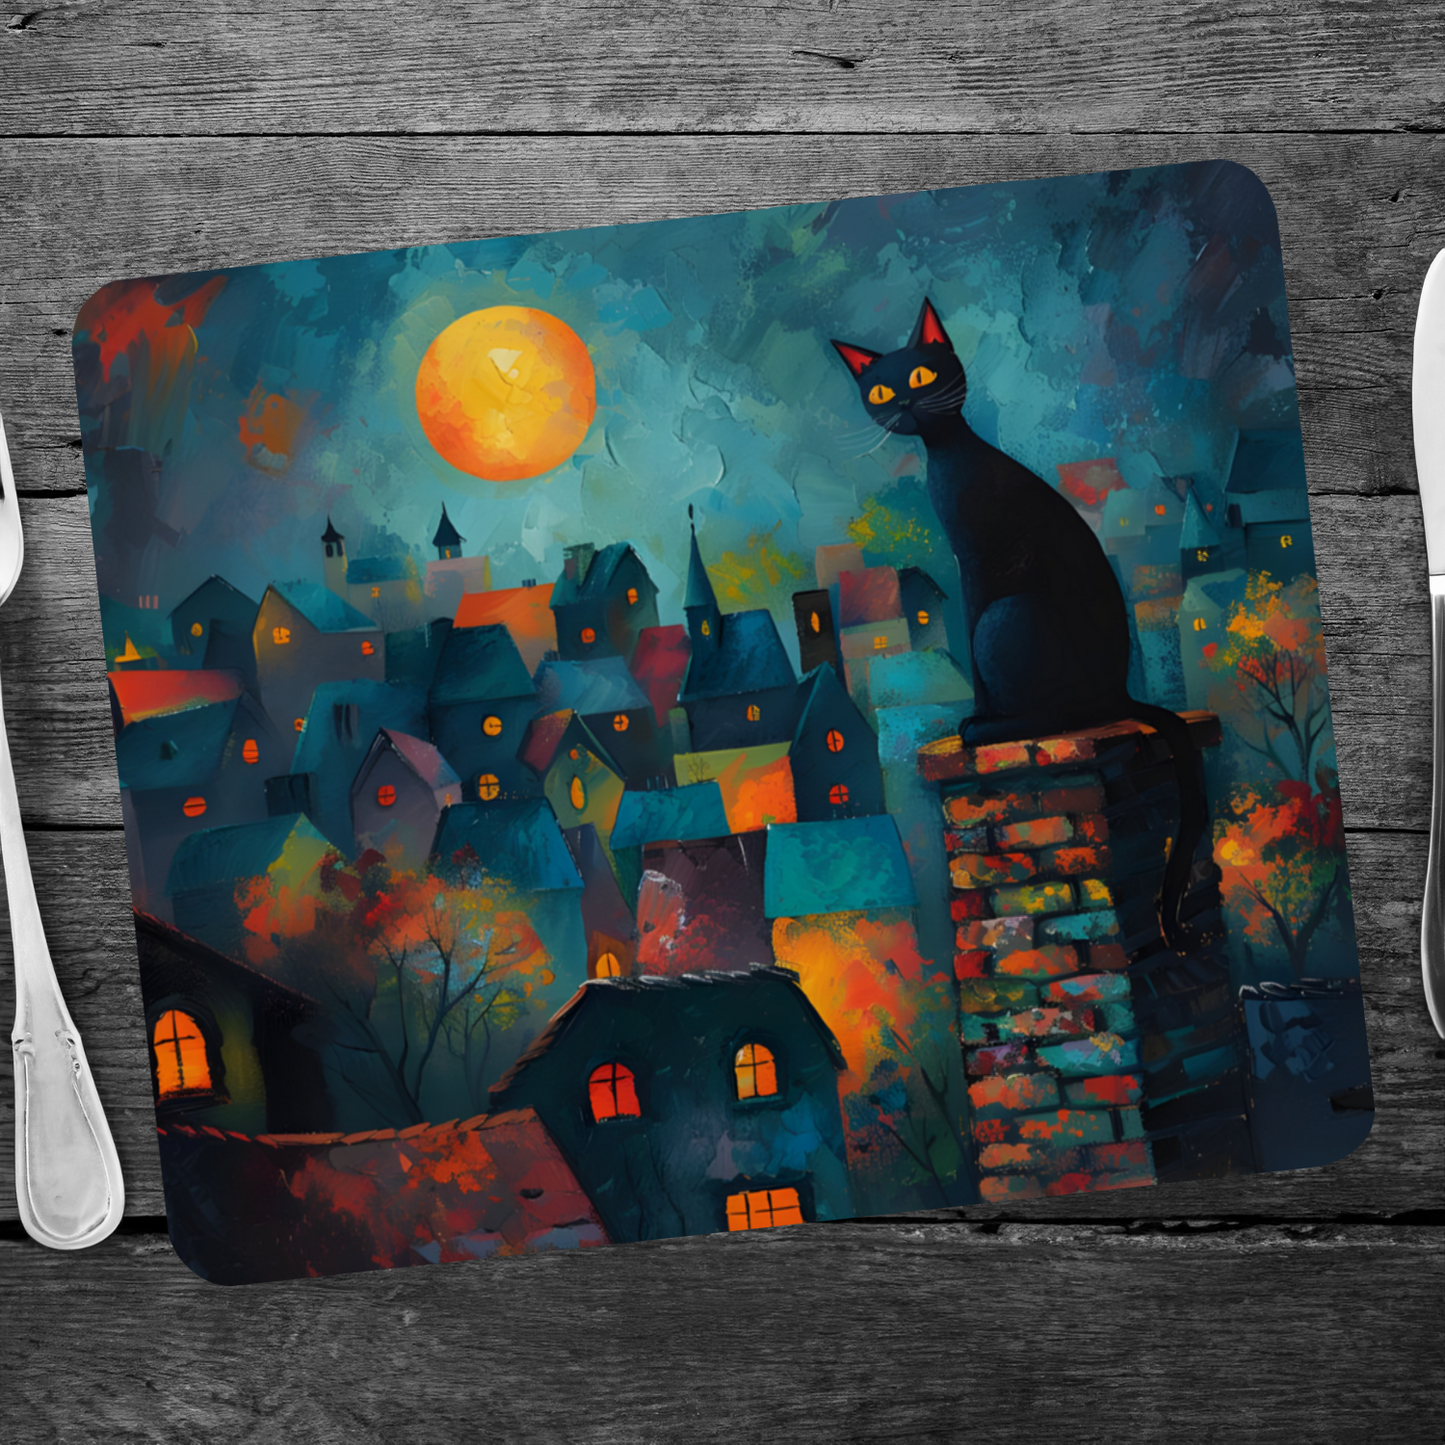 Twilight Over Rooftops Wooden Placemat